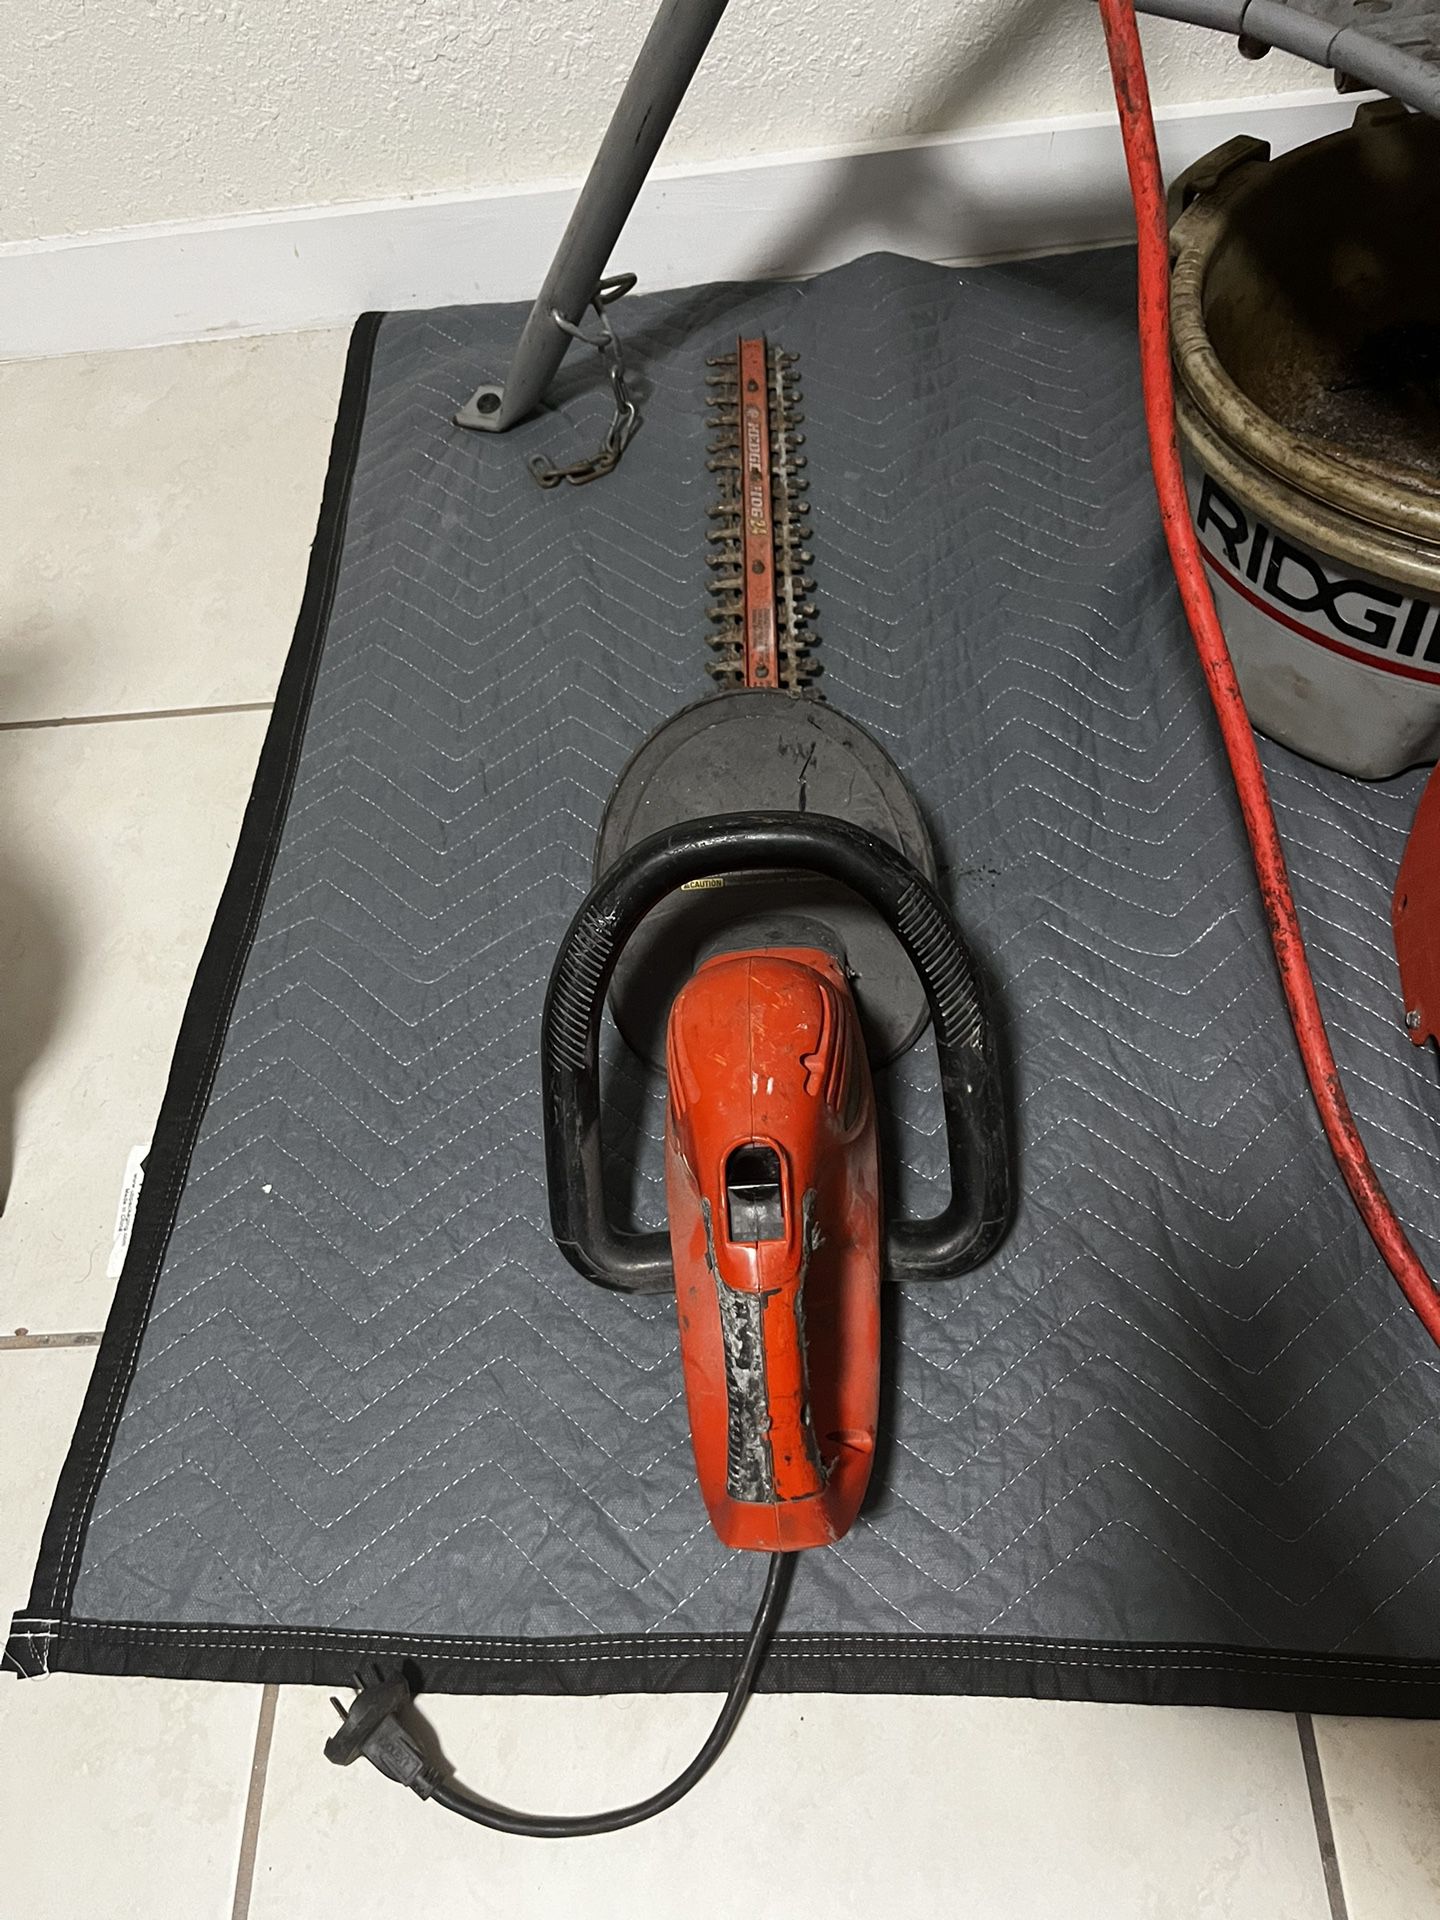 Black and Decker 24 in. 3.3 Amp Corded Dual Action Electric Hedge Hog Trimmer $40/ Delivery Available 